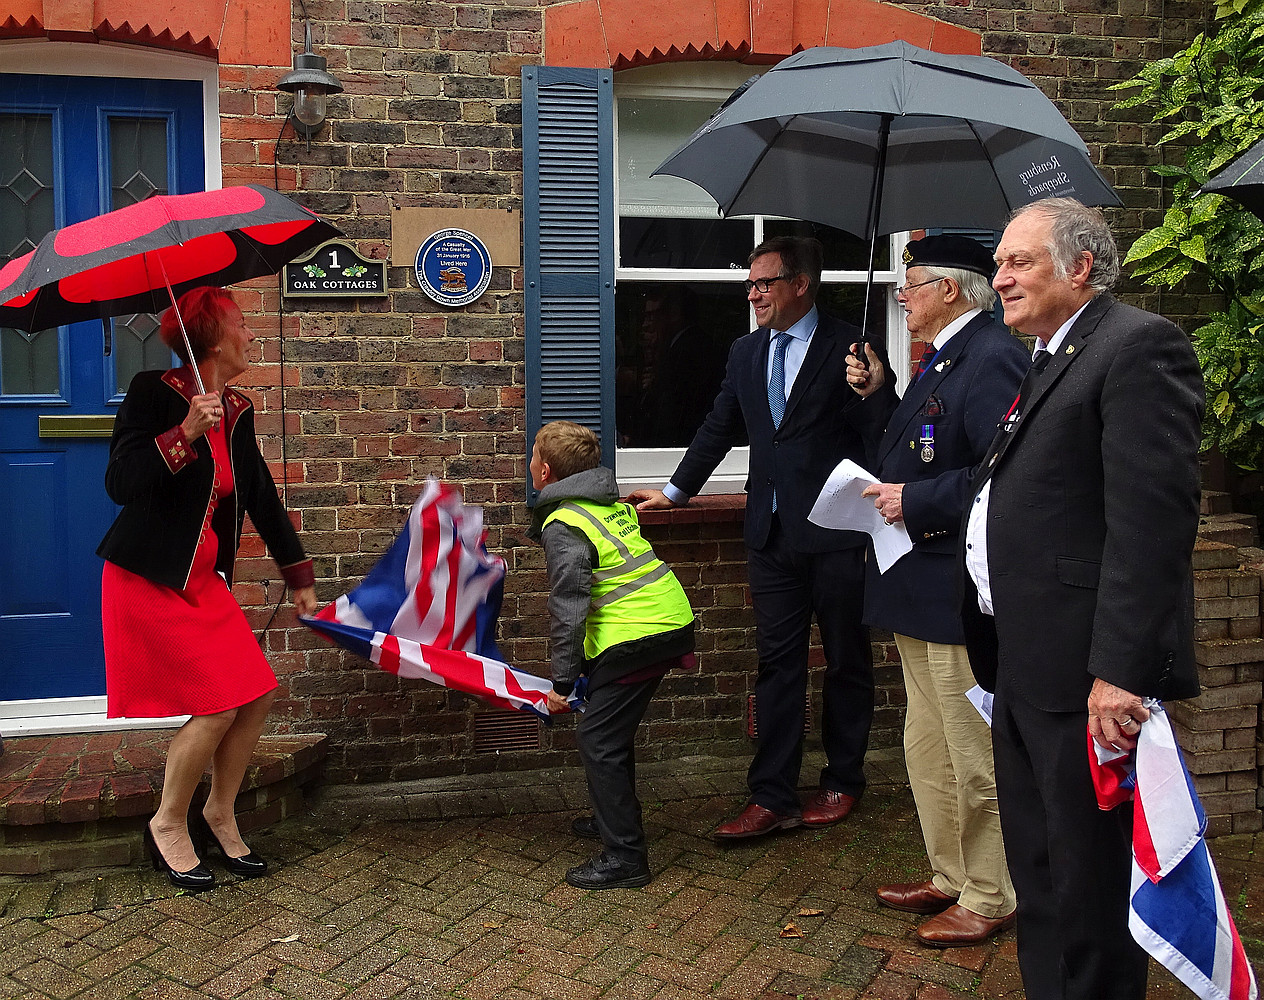 Unveiling plaque at 1 Sandy Lane with assistance from schoolboy.